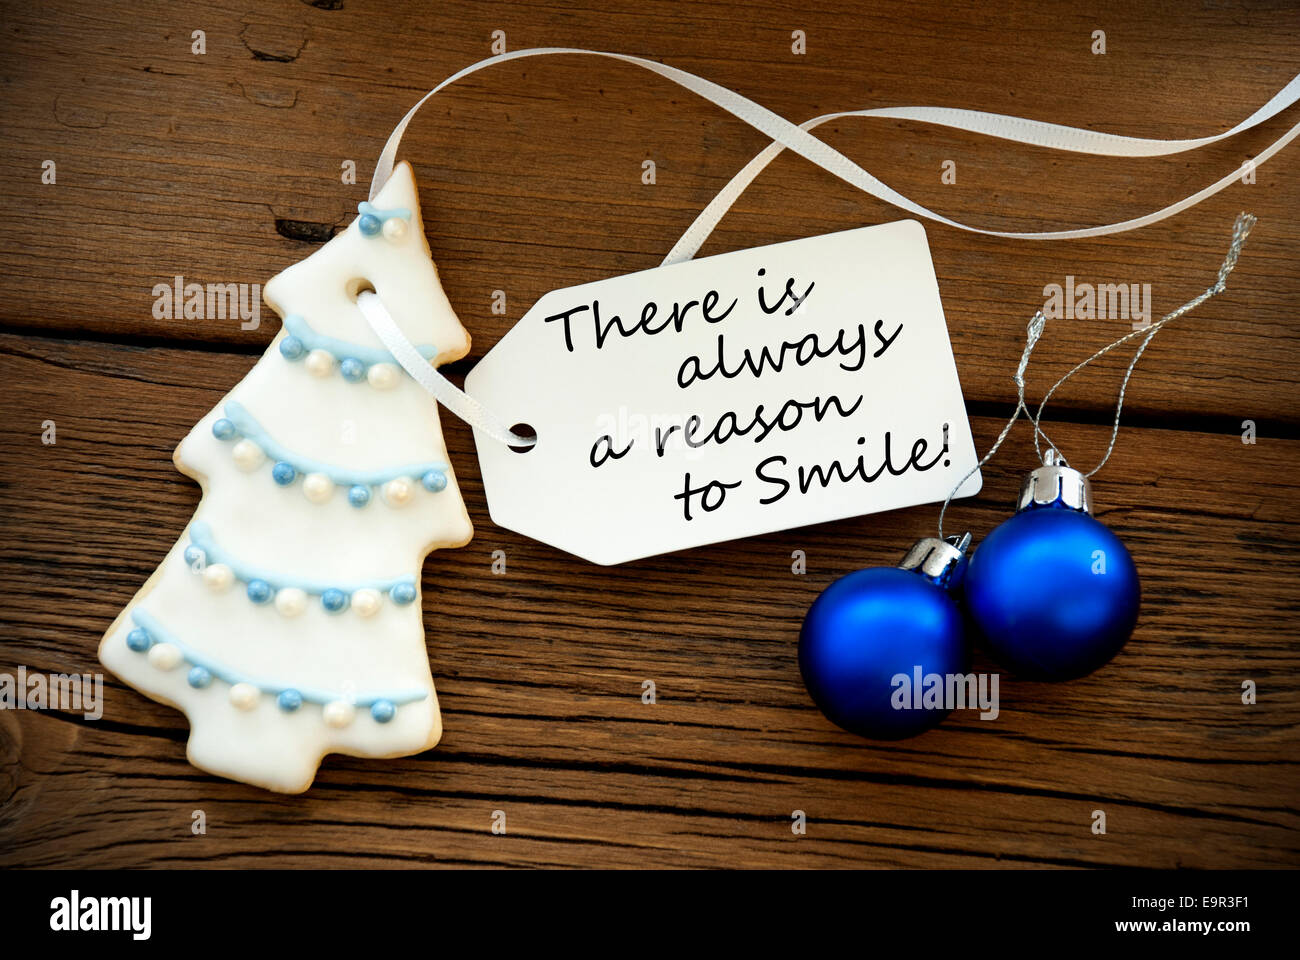 Christmas Tree Cookie And Two Blue Christmas Balls With White Label With Life Quote Saying There Is Always A Reason To Smile On Stock Photo